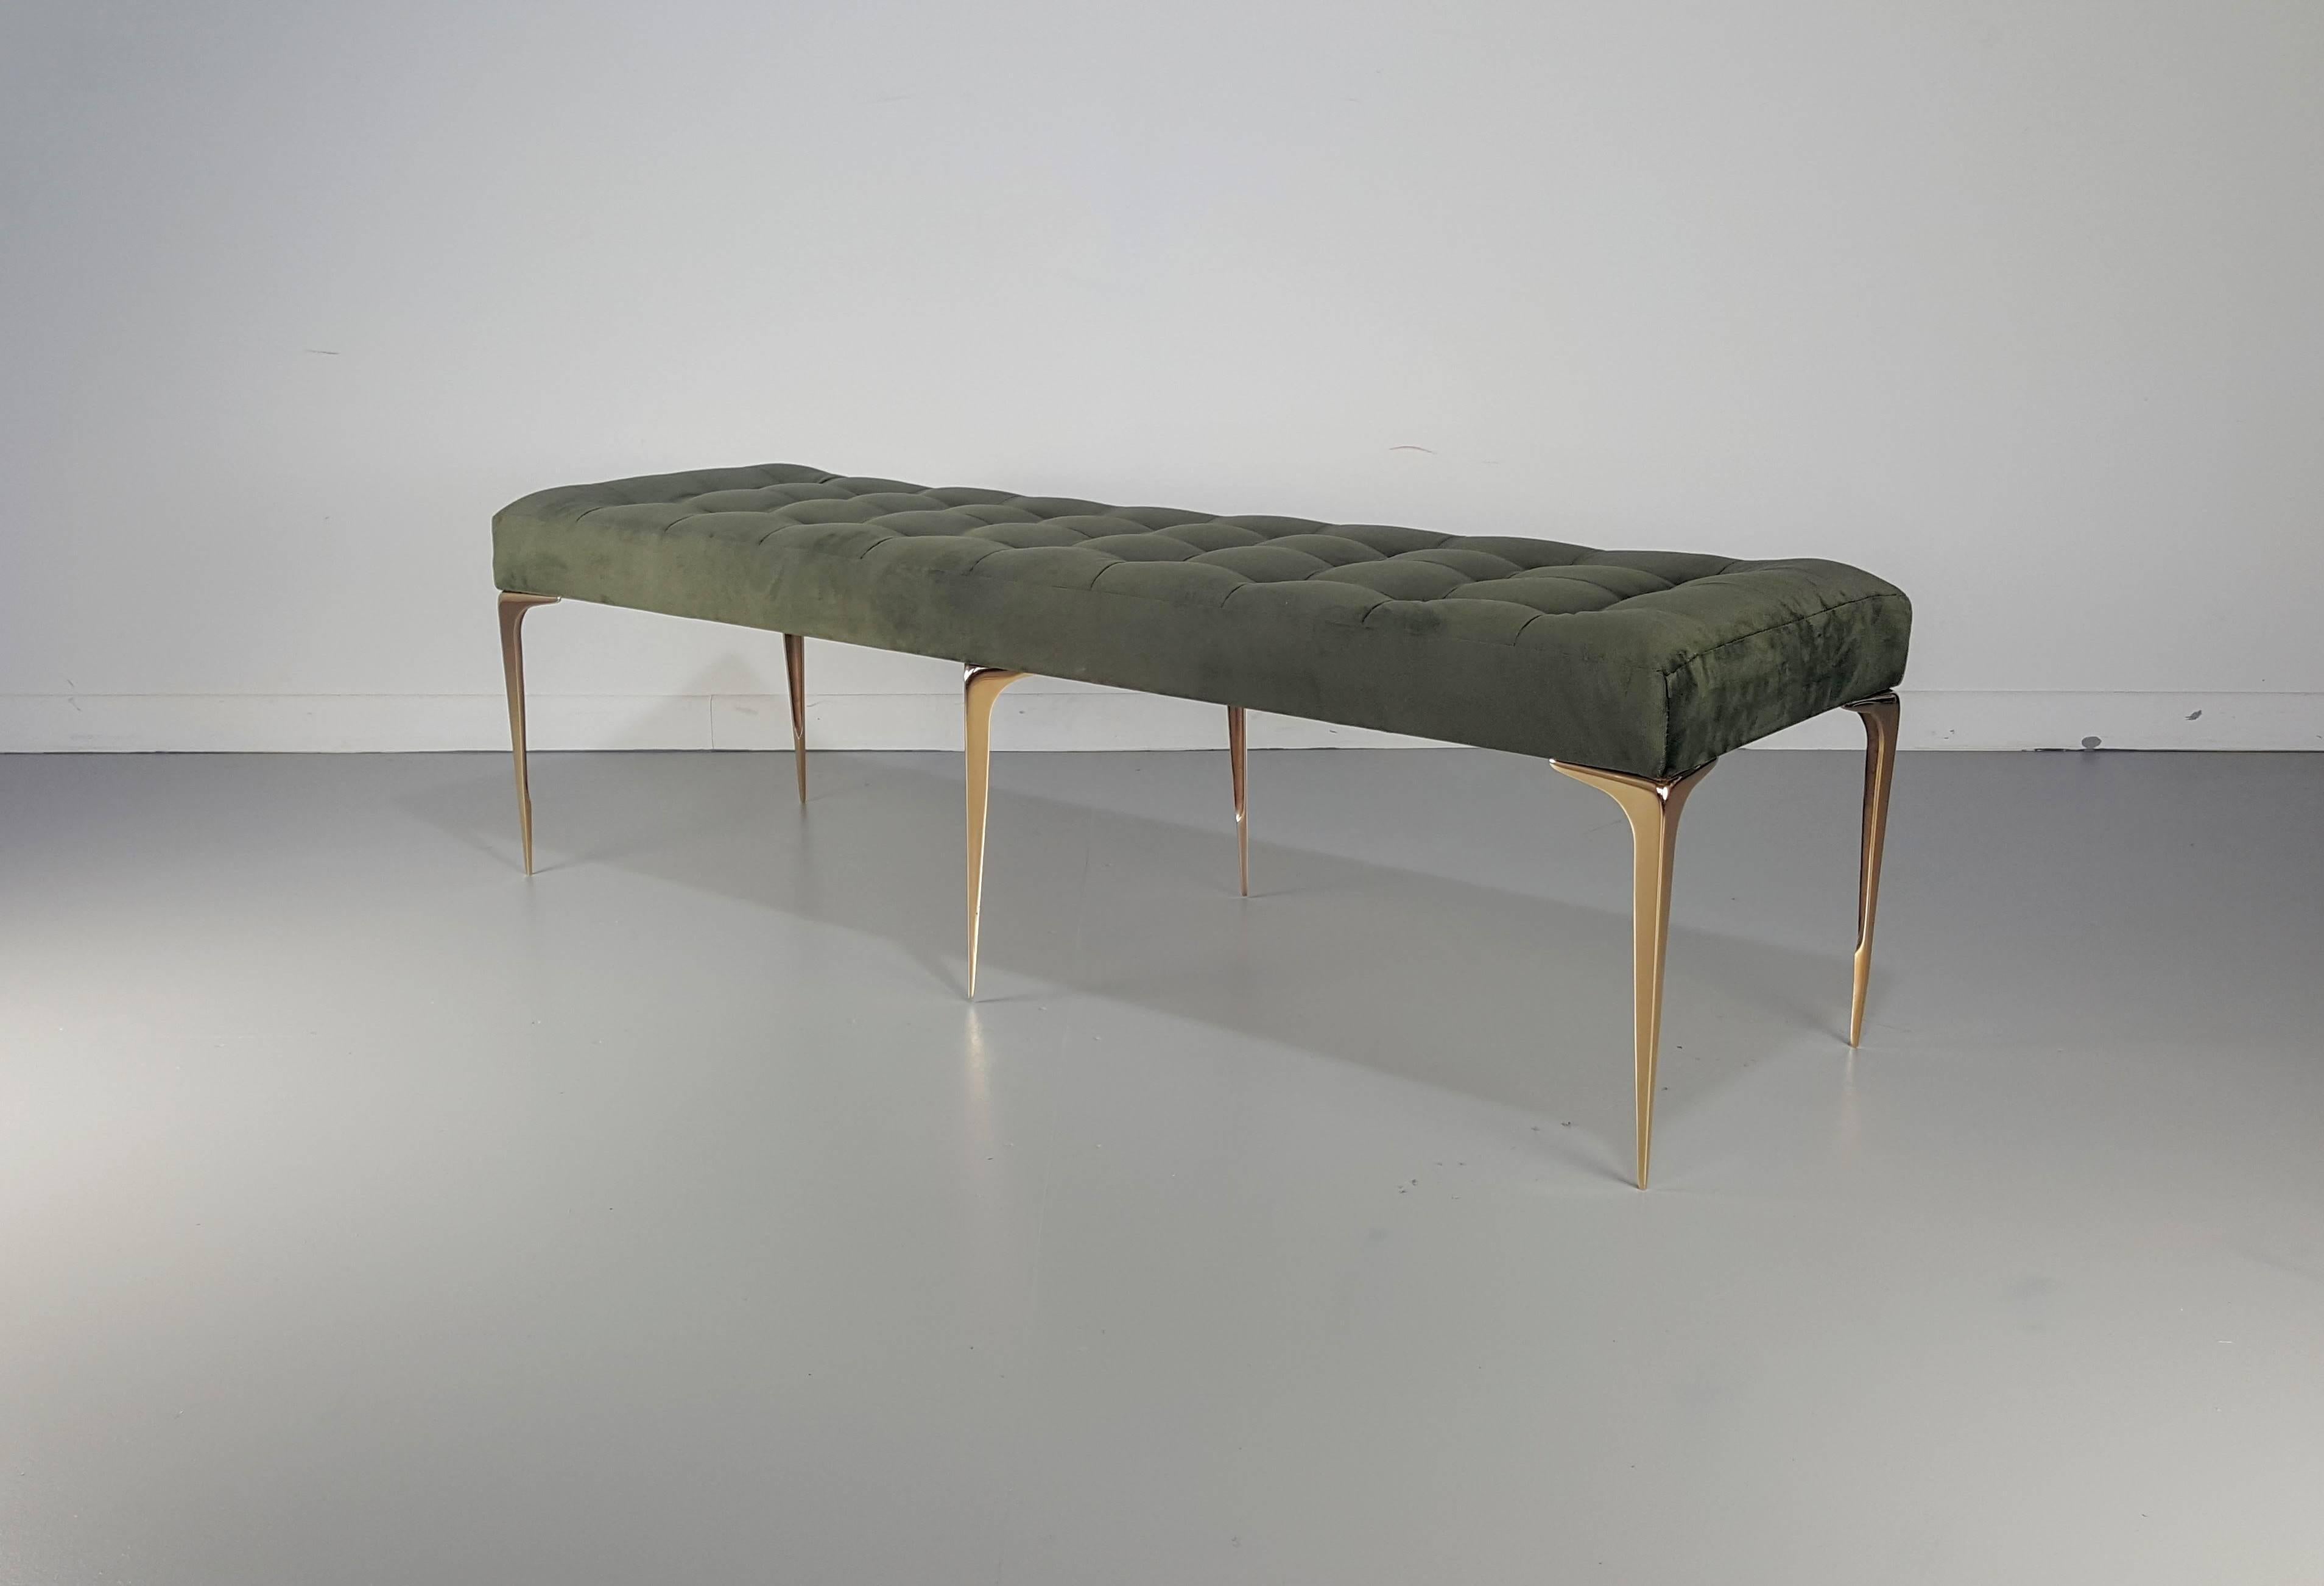 Lancia Espansa bench with a solid bronze tapered legs. The leg is an exact reproduction of a 1950s Italian design. Originally produced in brass, our version is hand cast in solid bronze which has a richer, warmer golden tone. Custom sizes, fabrics,